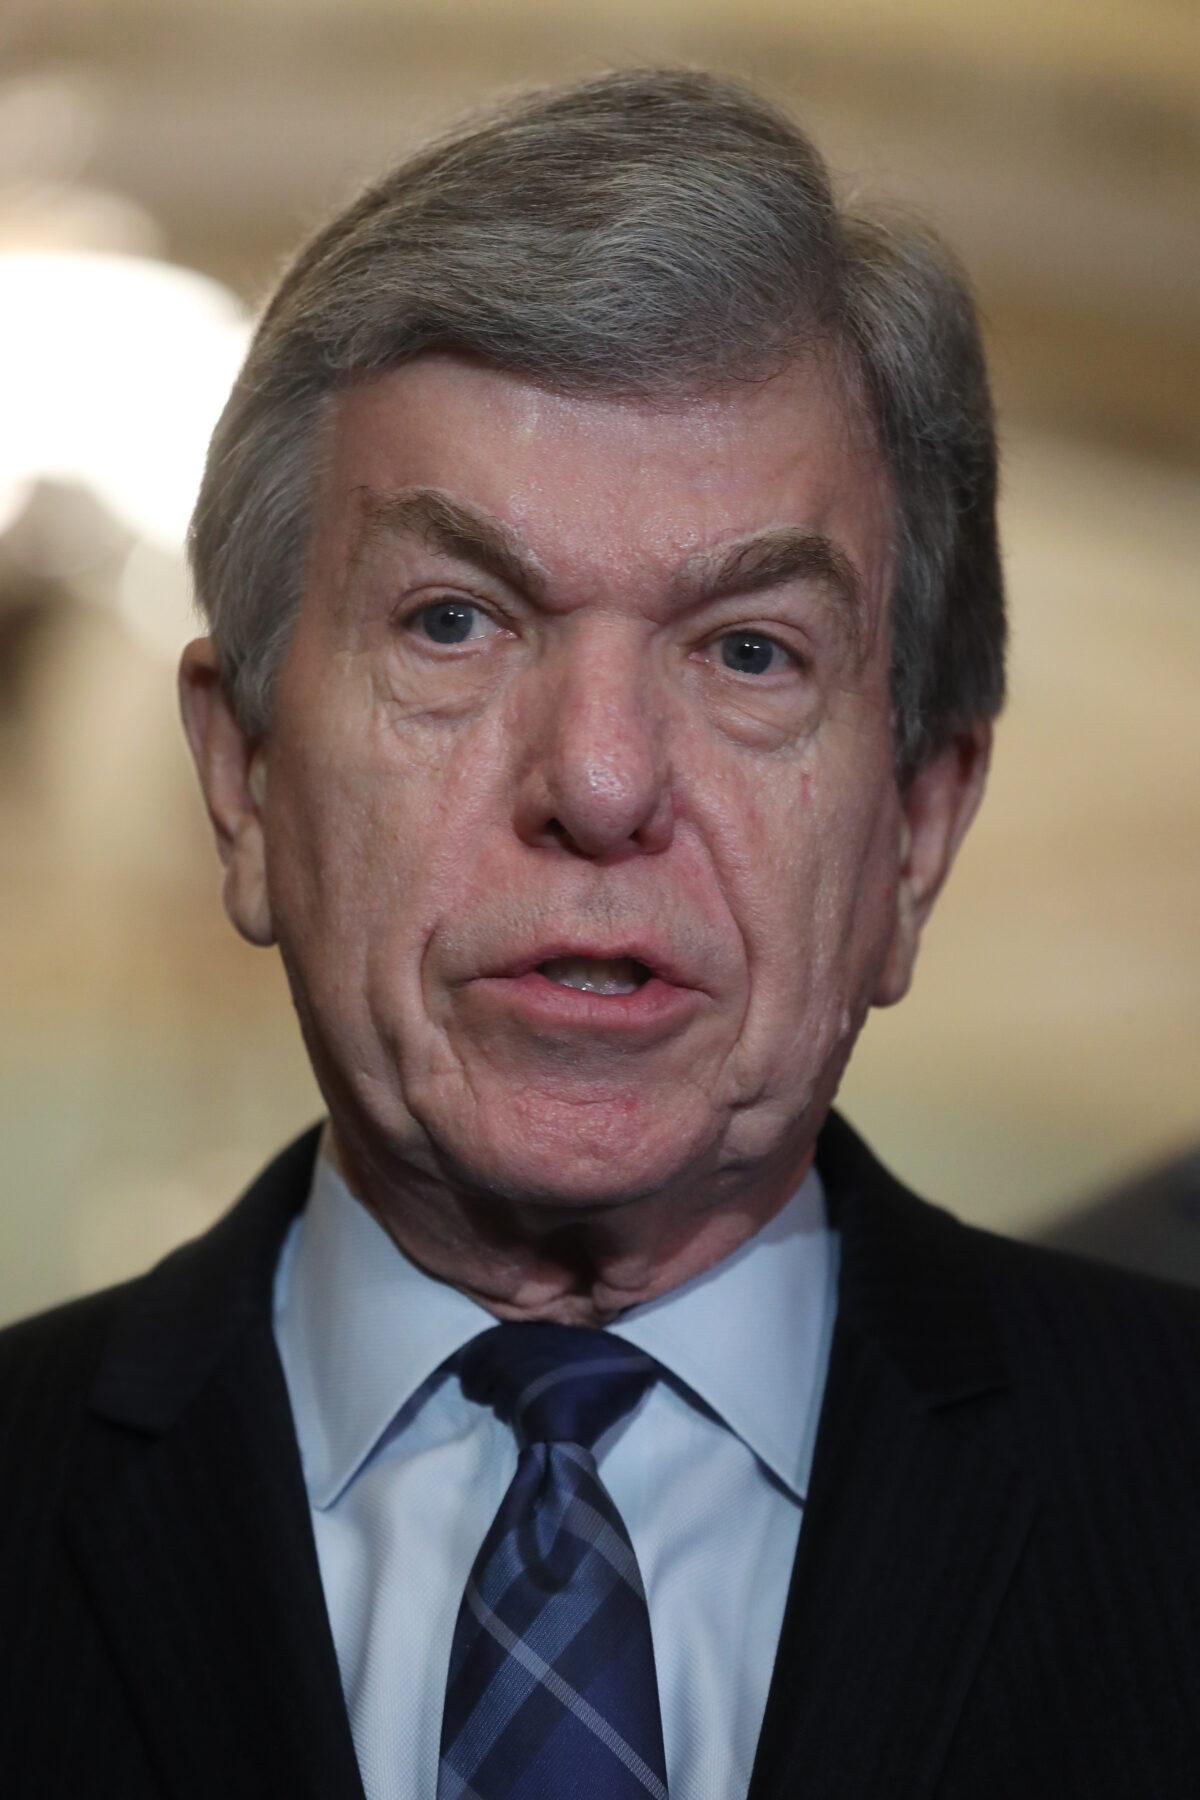 Sen. Roy Blunt (R-Mo.) speaks to the media after attending the Senate Republican policy luncheon on Capitol Hill, in Washington on Dec. 17, 2019. (Mark Wilson/Getty Images)